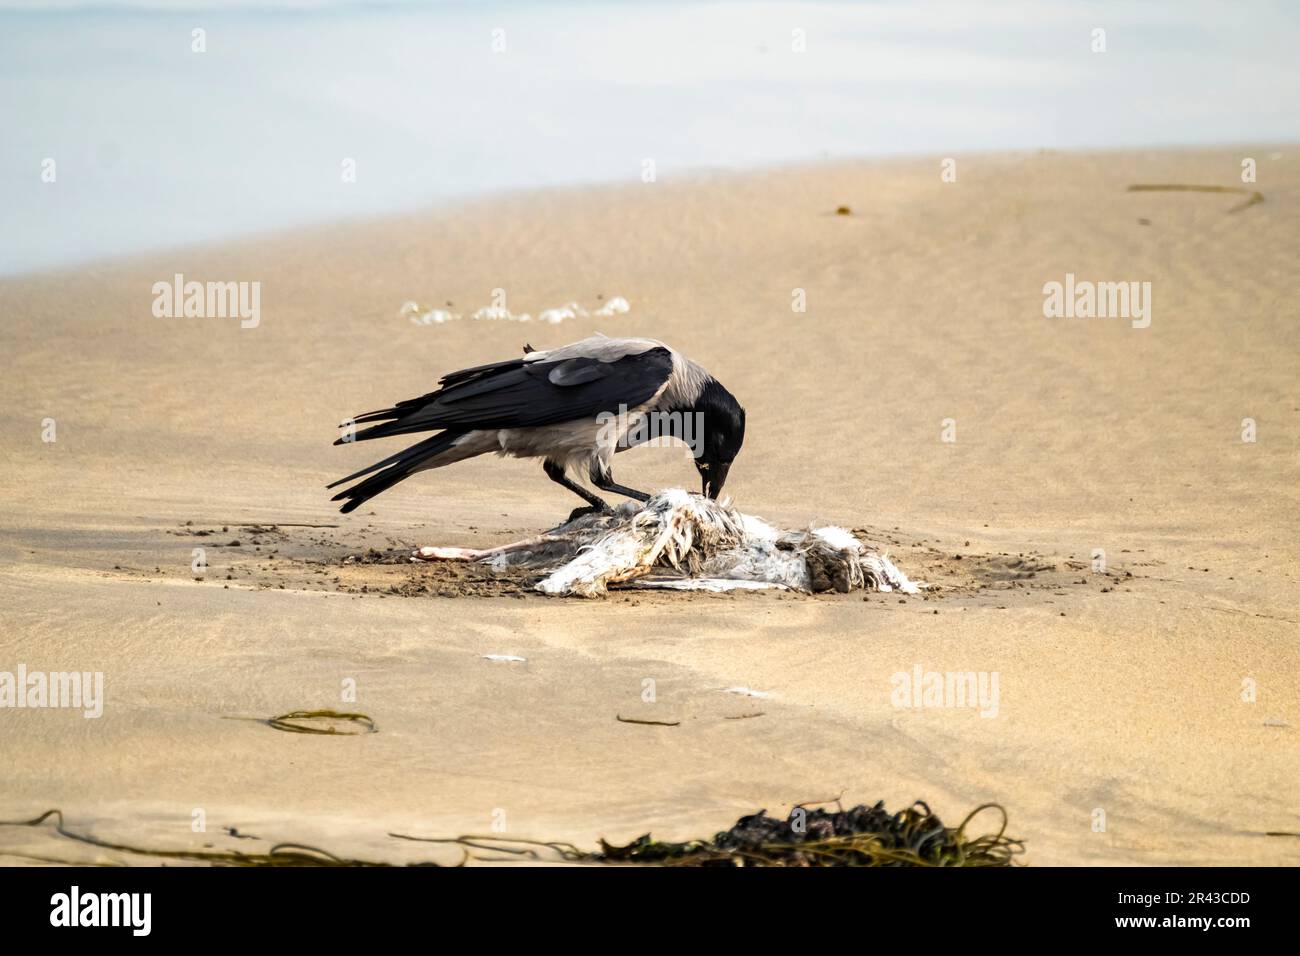 Crow eating a seagull on a sandy beach in Ireland. Stock Photo